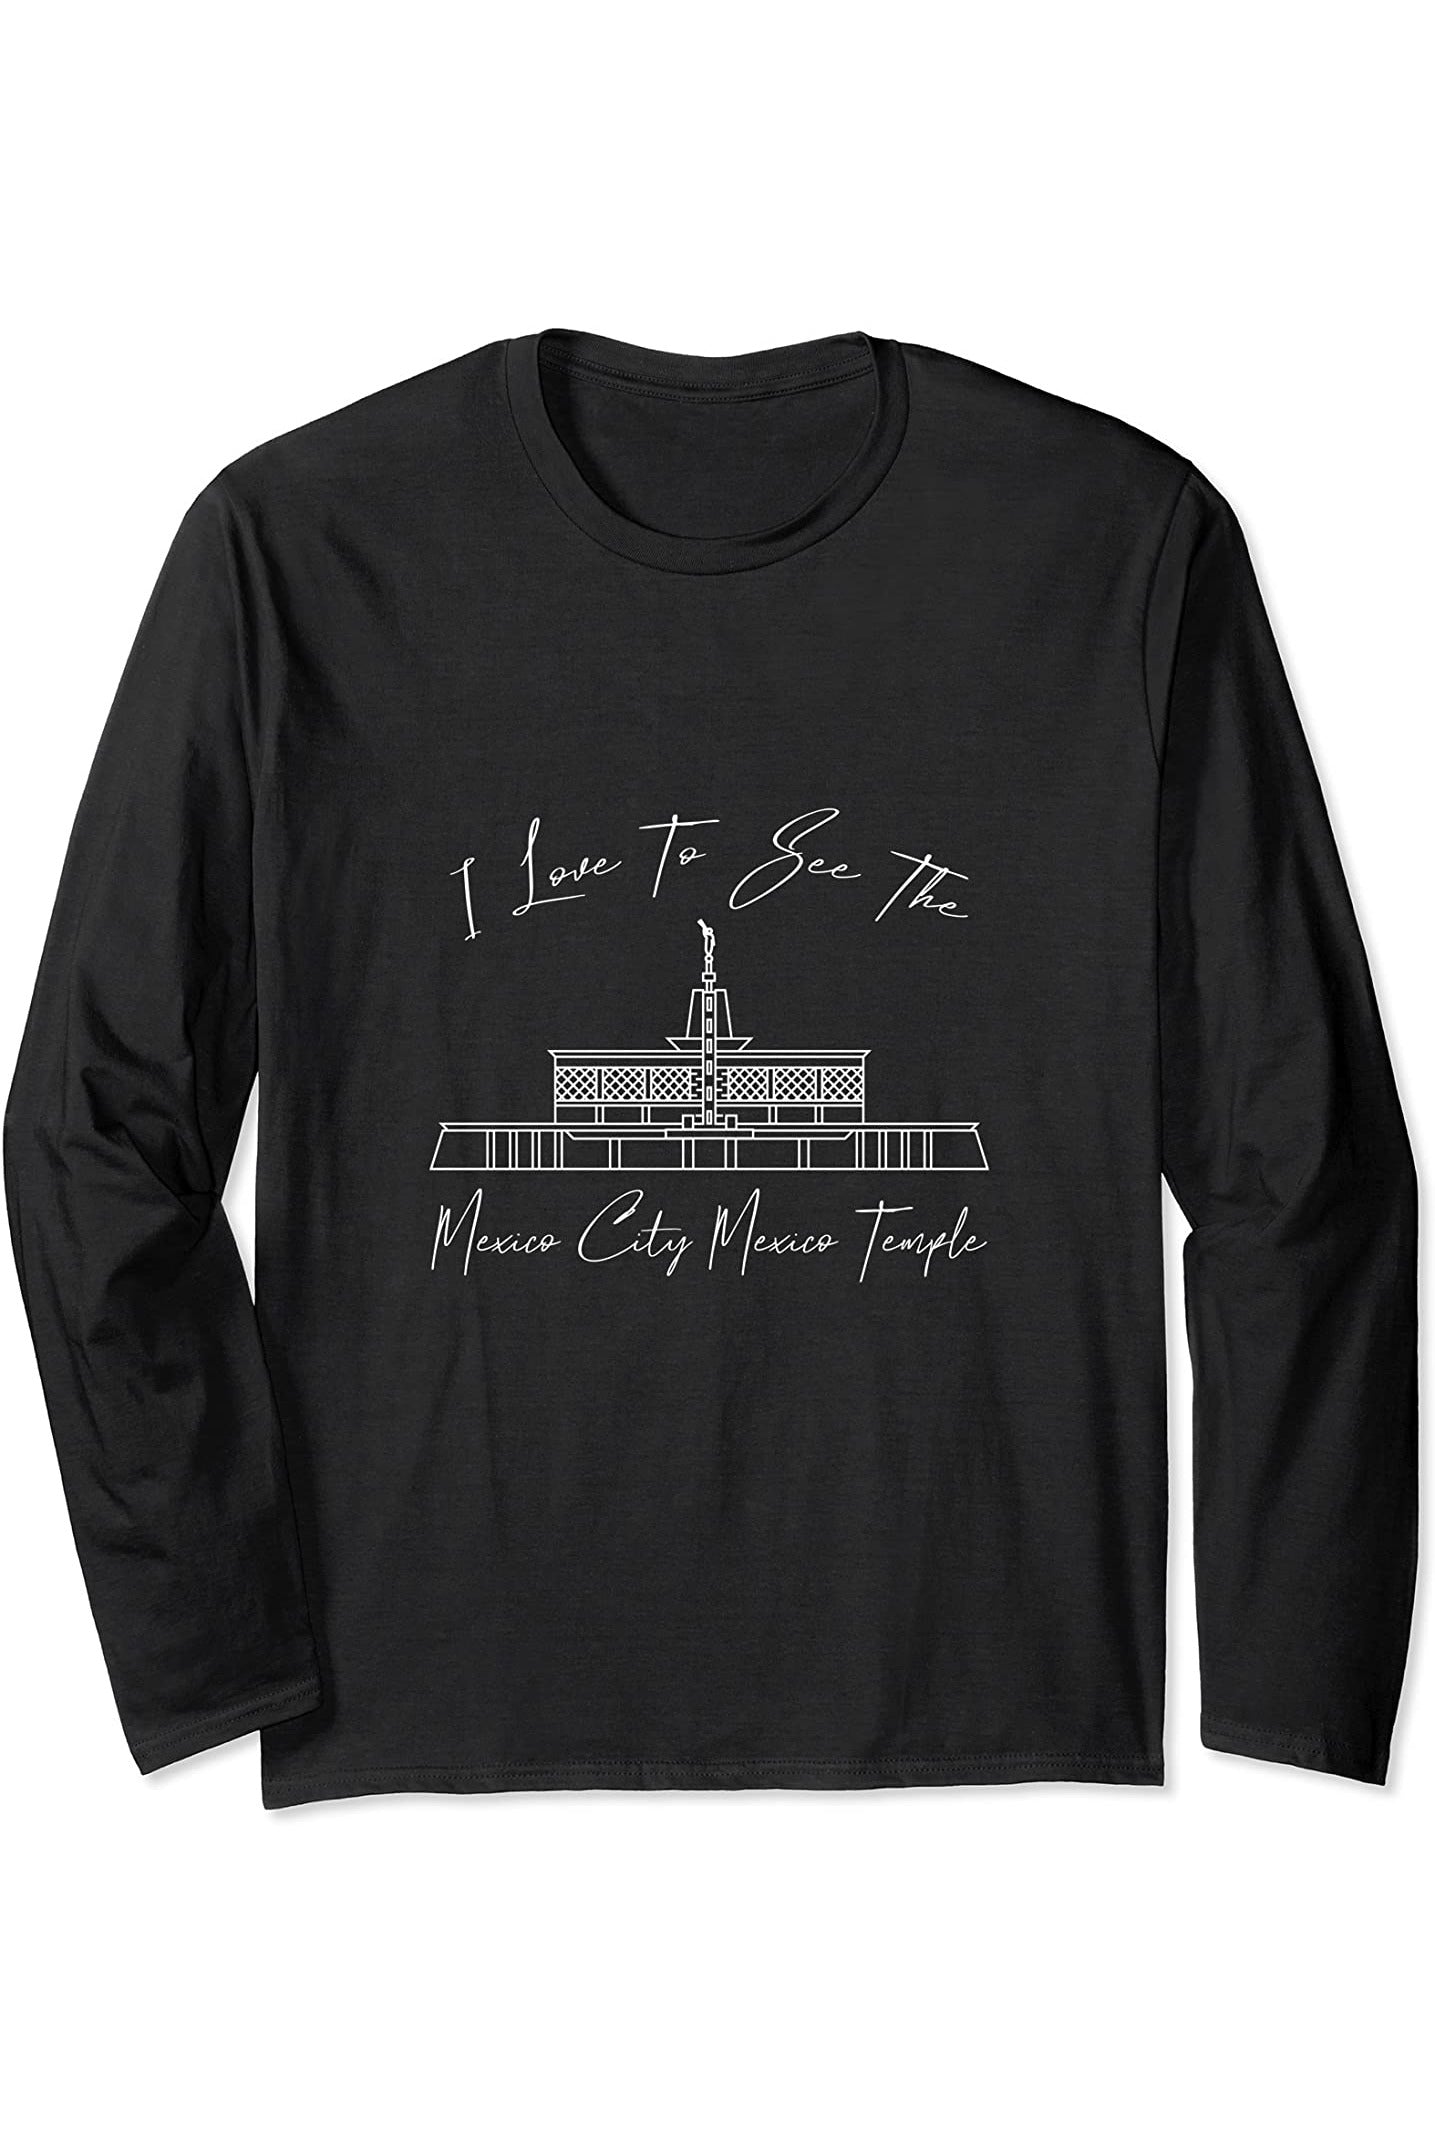 Mexico City Mexico Temple Long Sleeve T-Shirt - Calligraphy Style (English) US